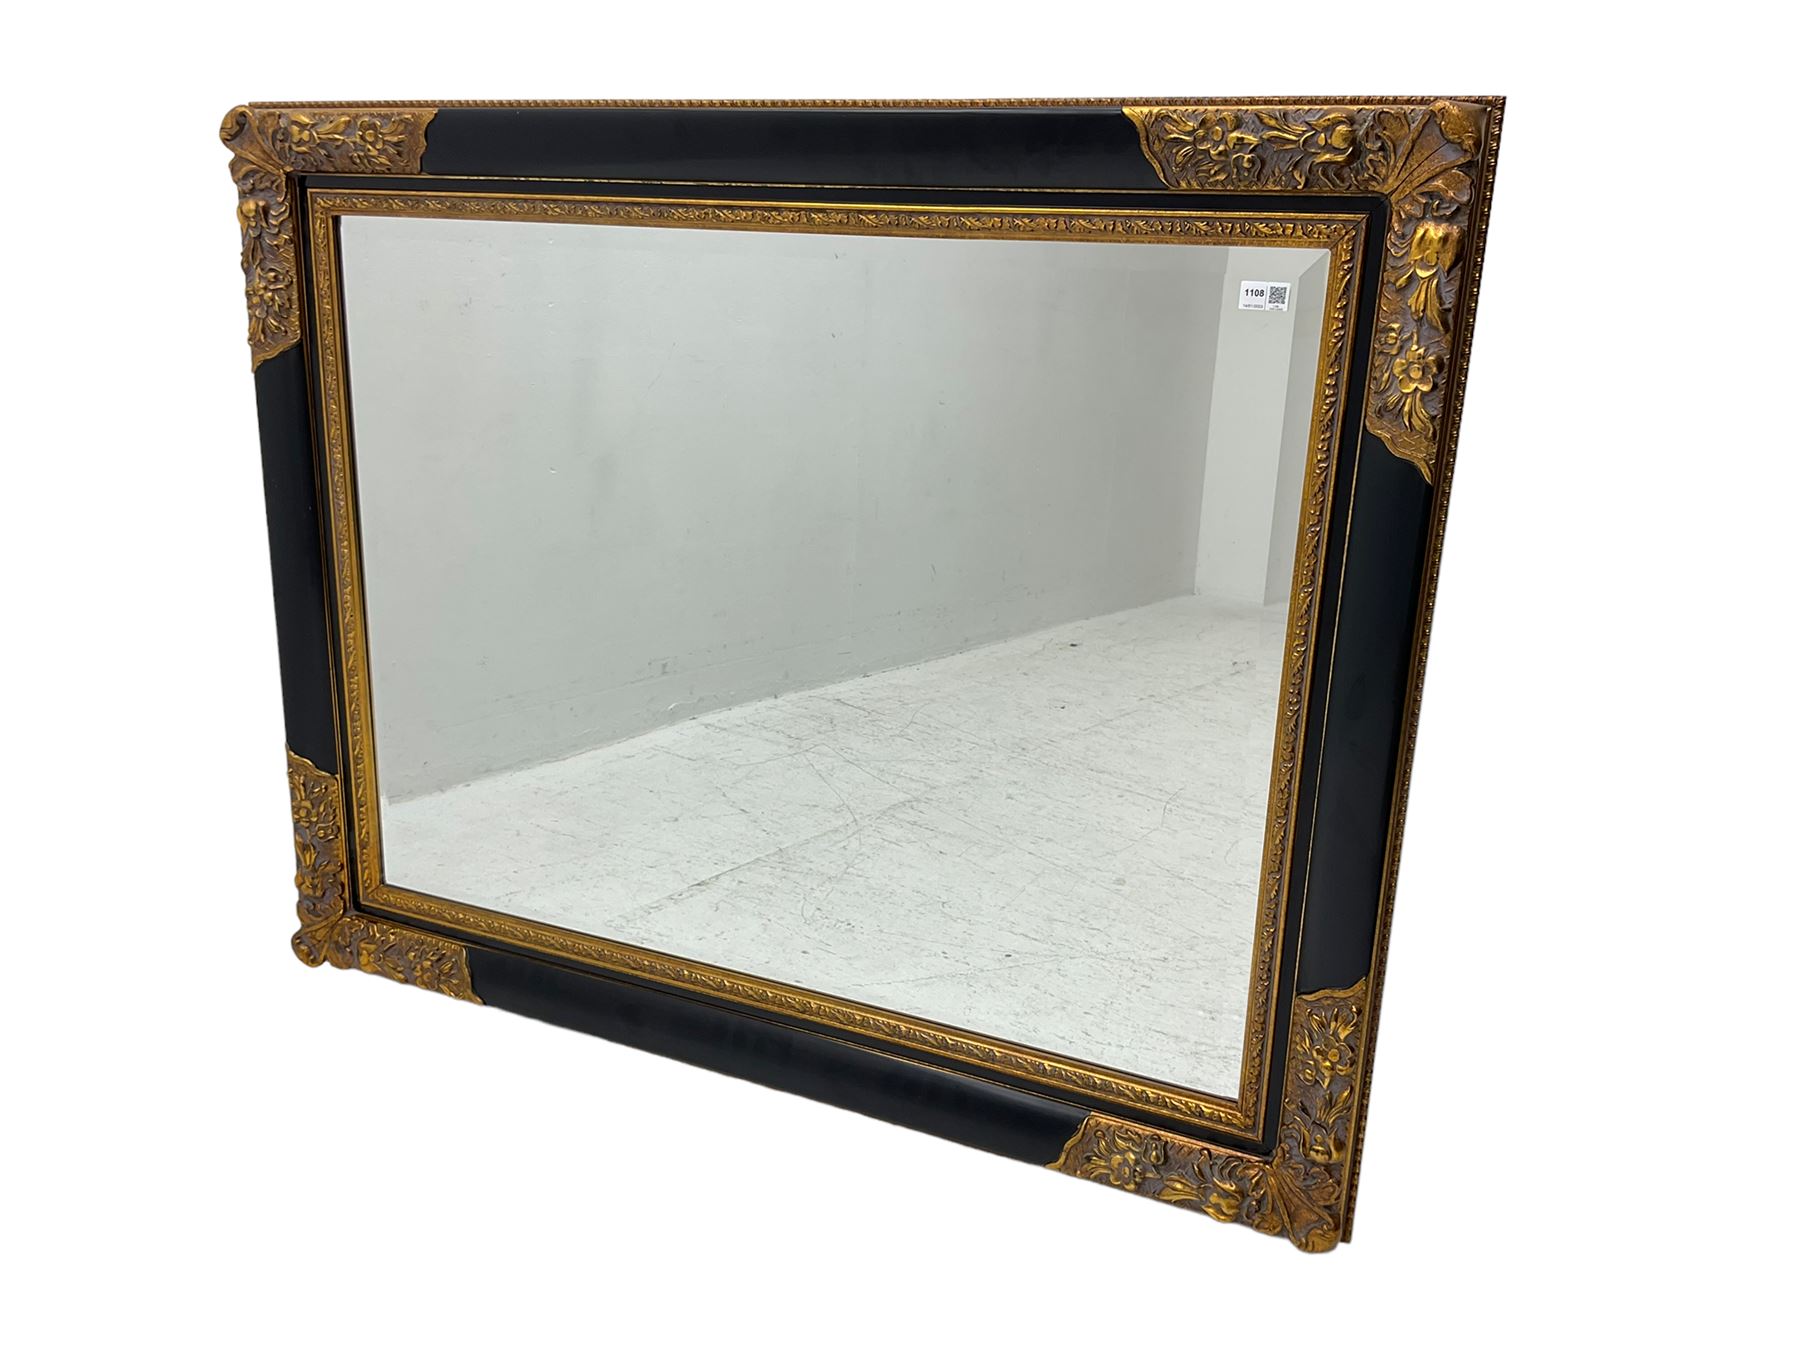 Gilt and ebonised framed wall mirror - Image 2 of 4